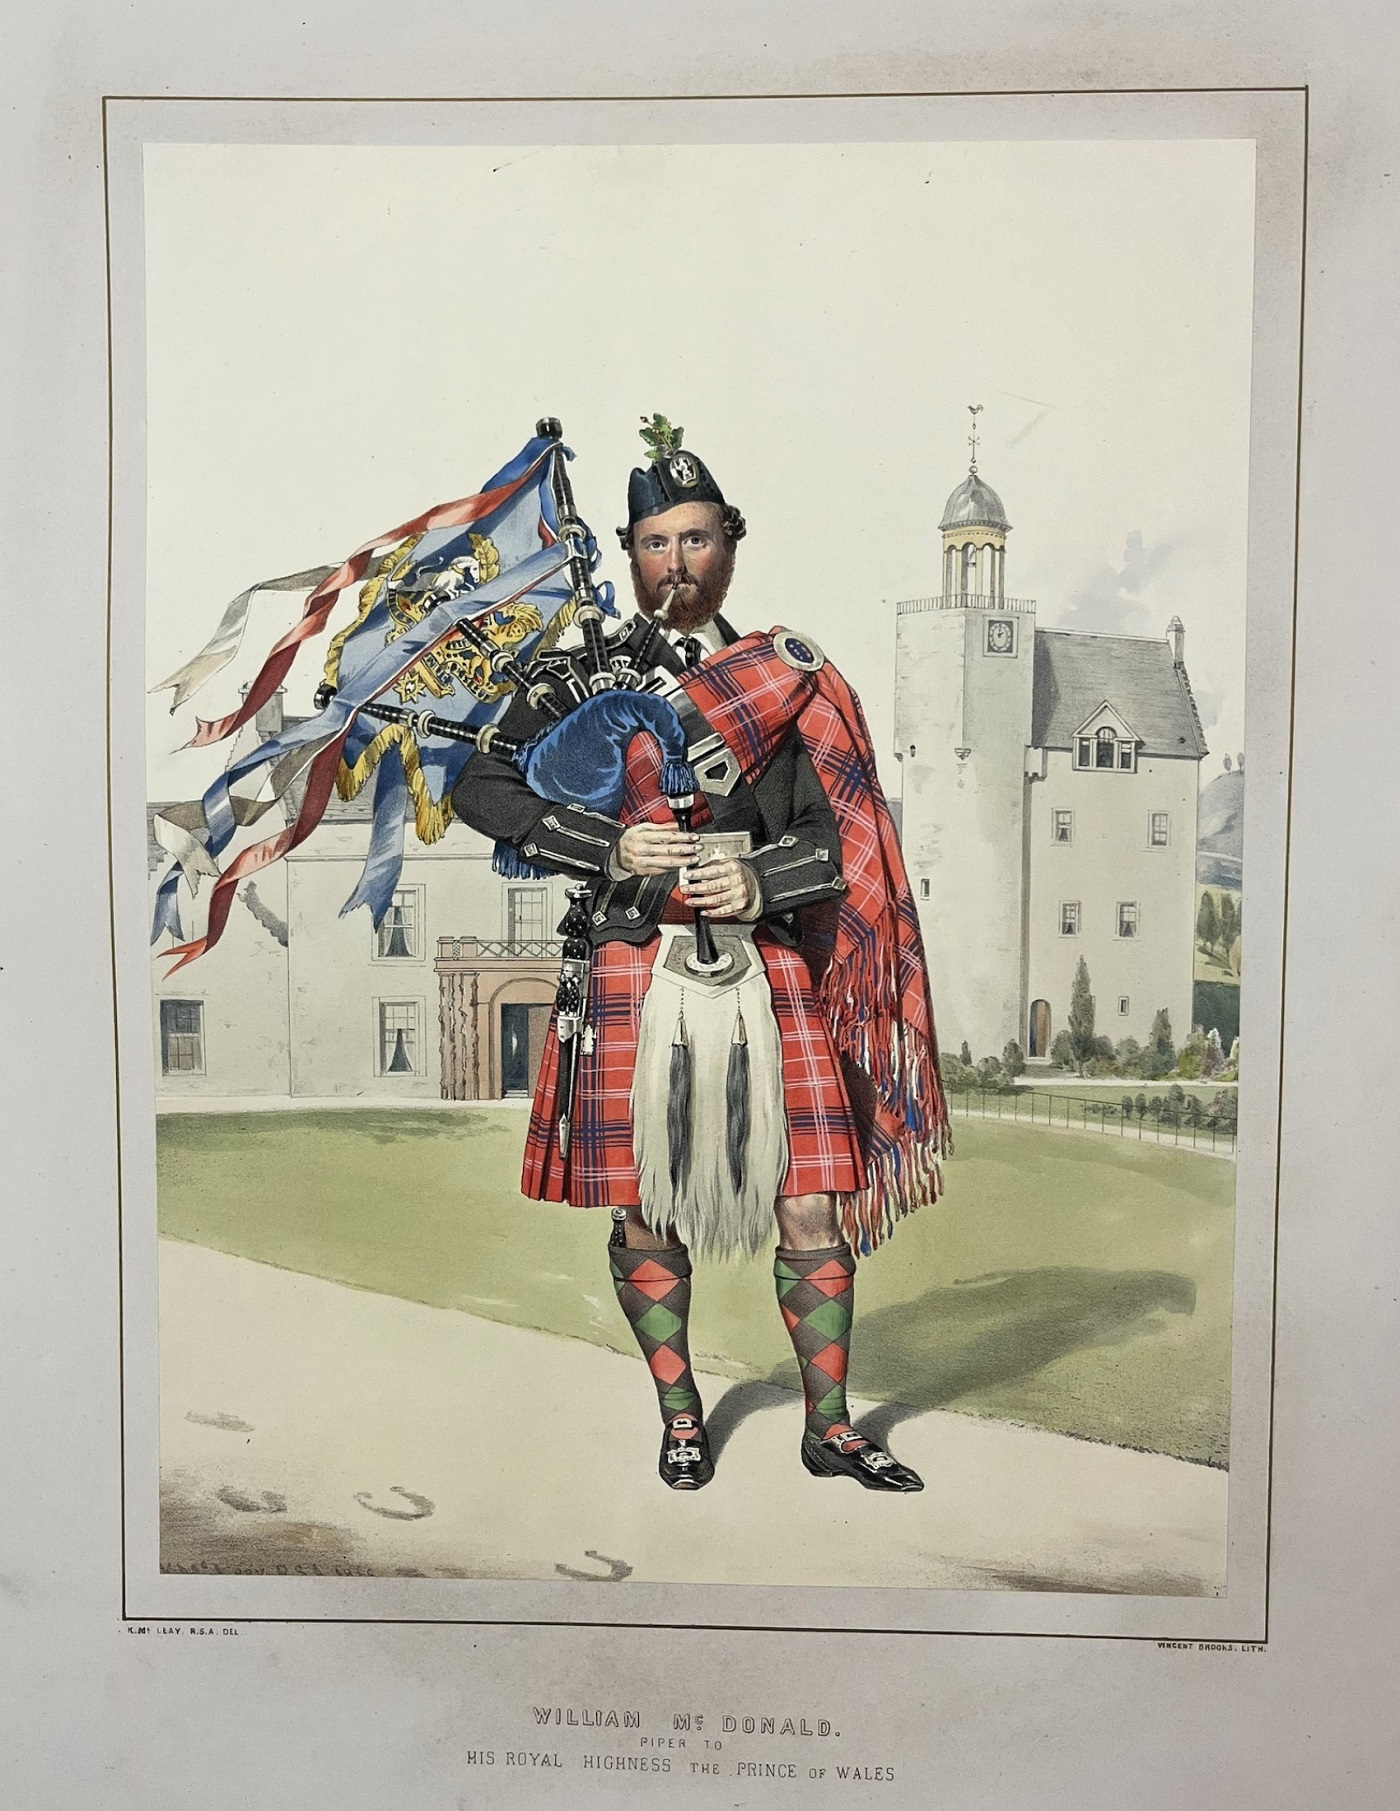 Illustration of a piper wearing vivid red Highland Dress standing in front of a white castle. Colourful banners fly from his pipes.